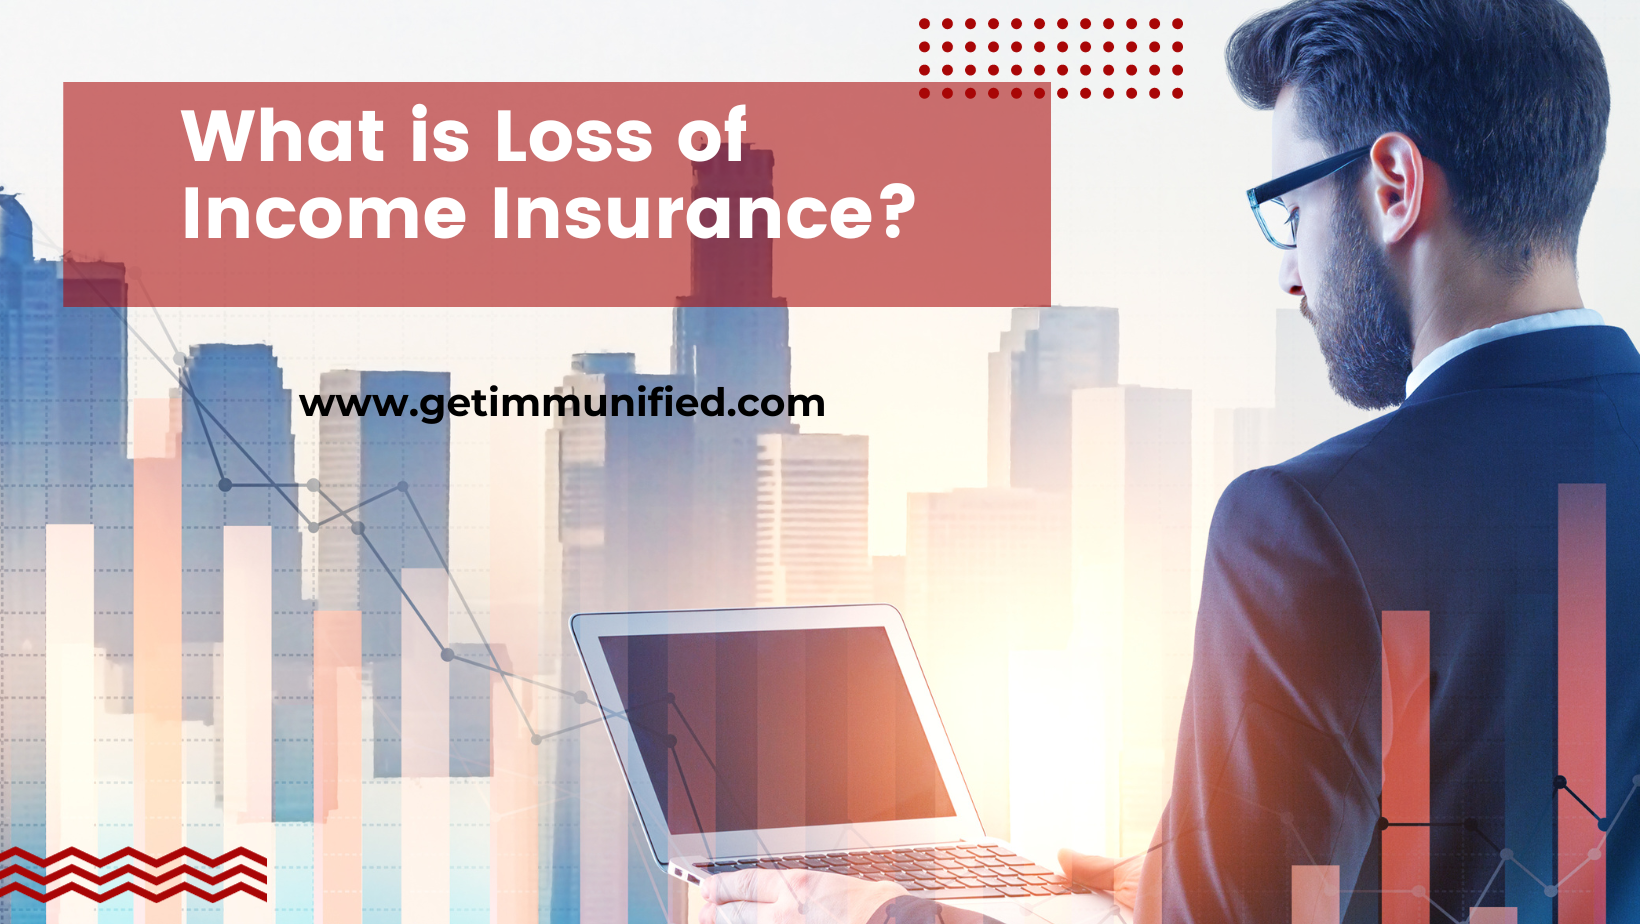 Loss of Income Insurance for self employed